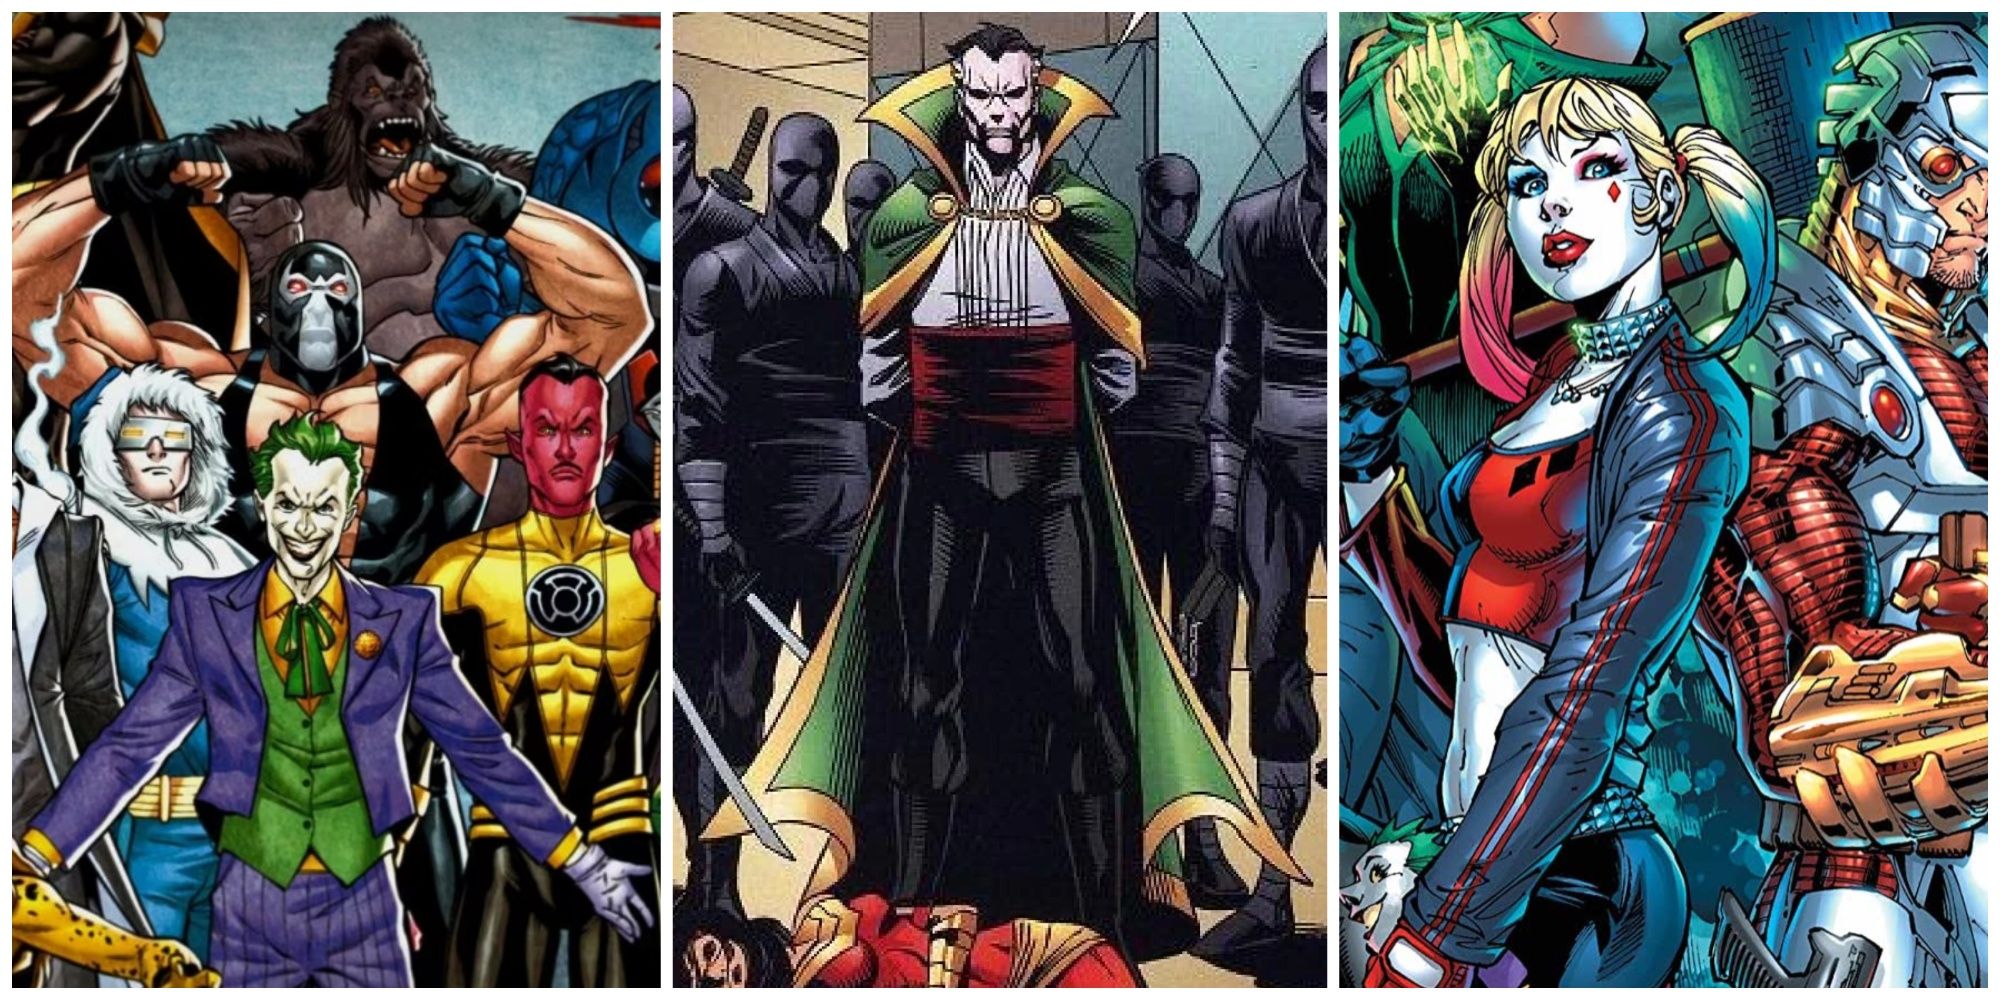 Other] Put together my ideal supervillain team and gave them a name. What  do you think? : r/DCcomics